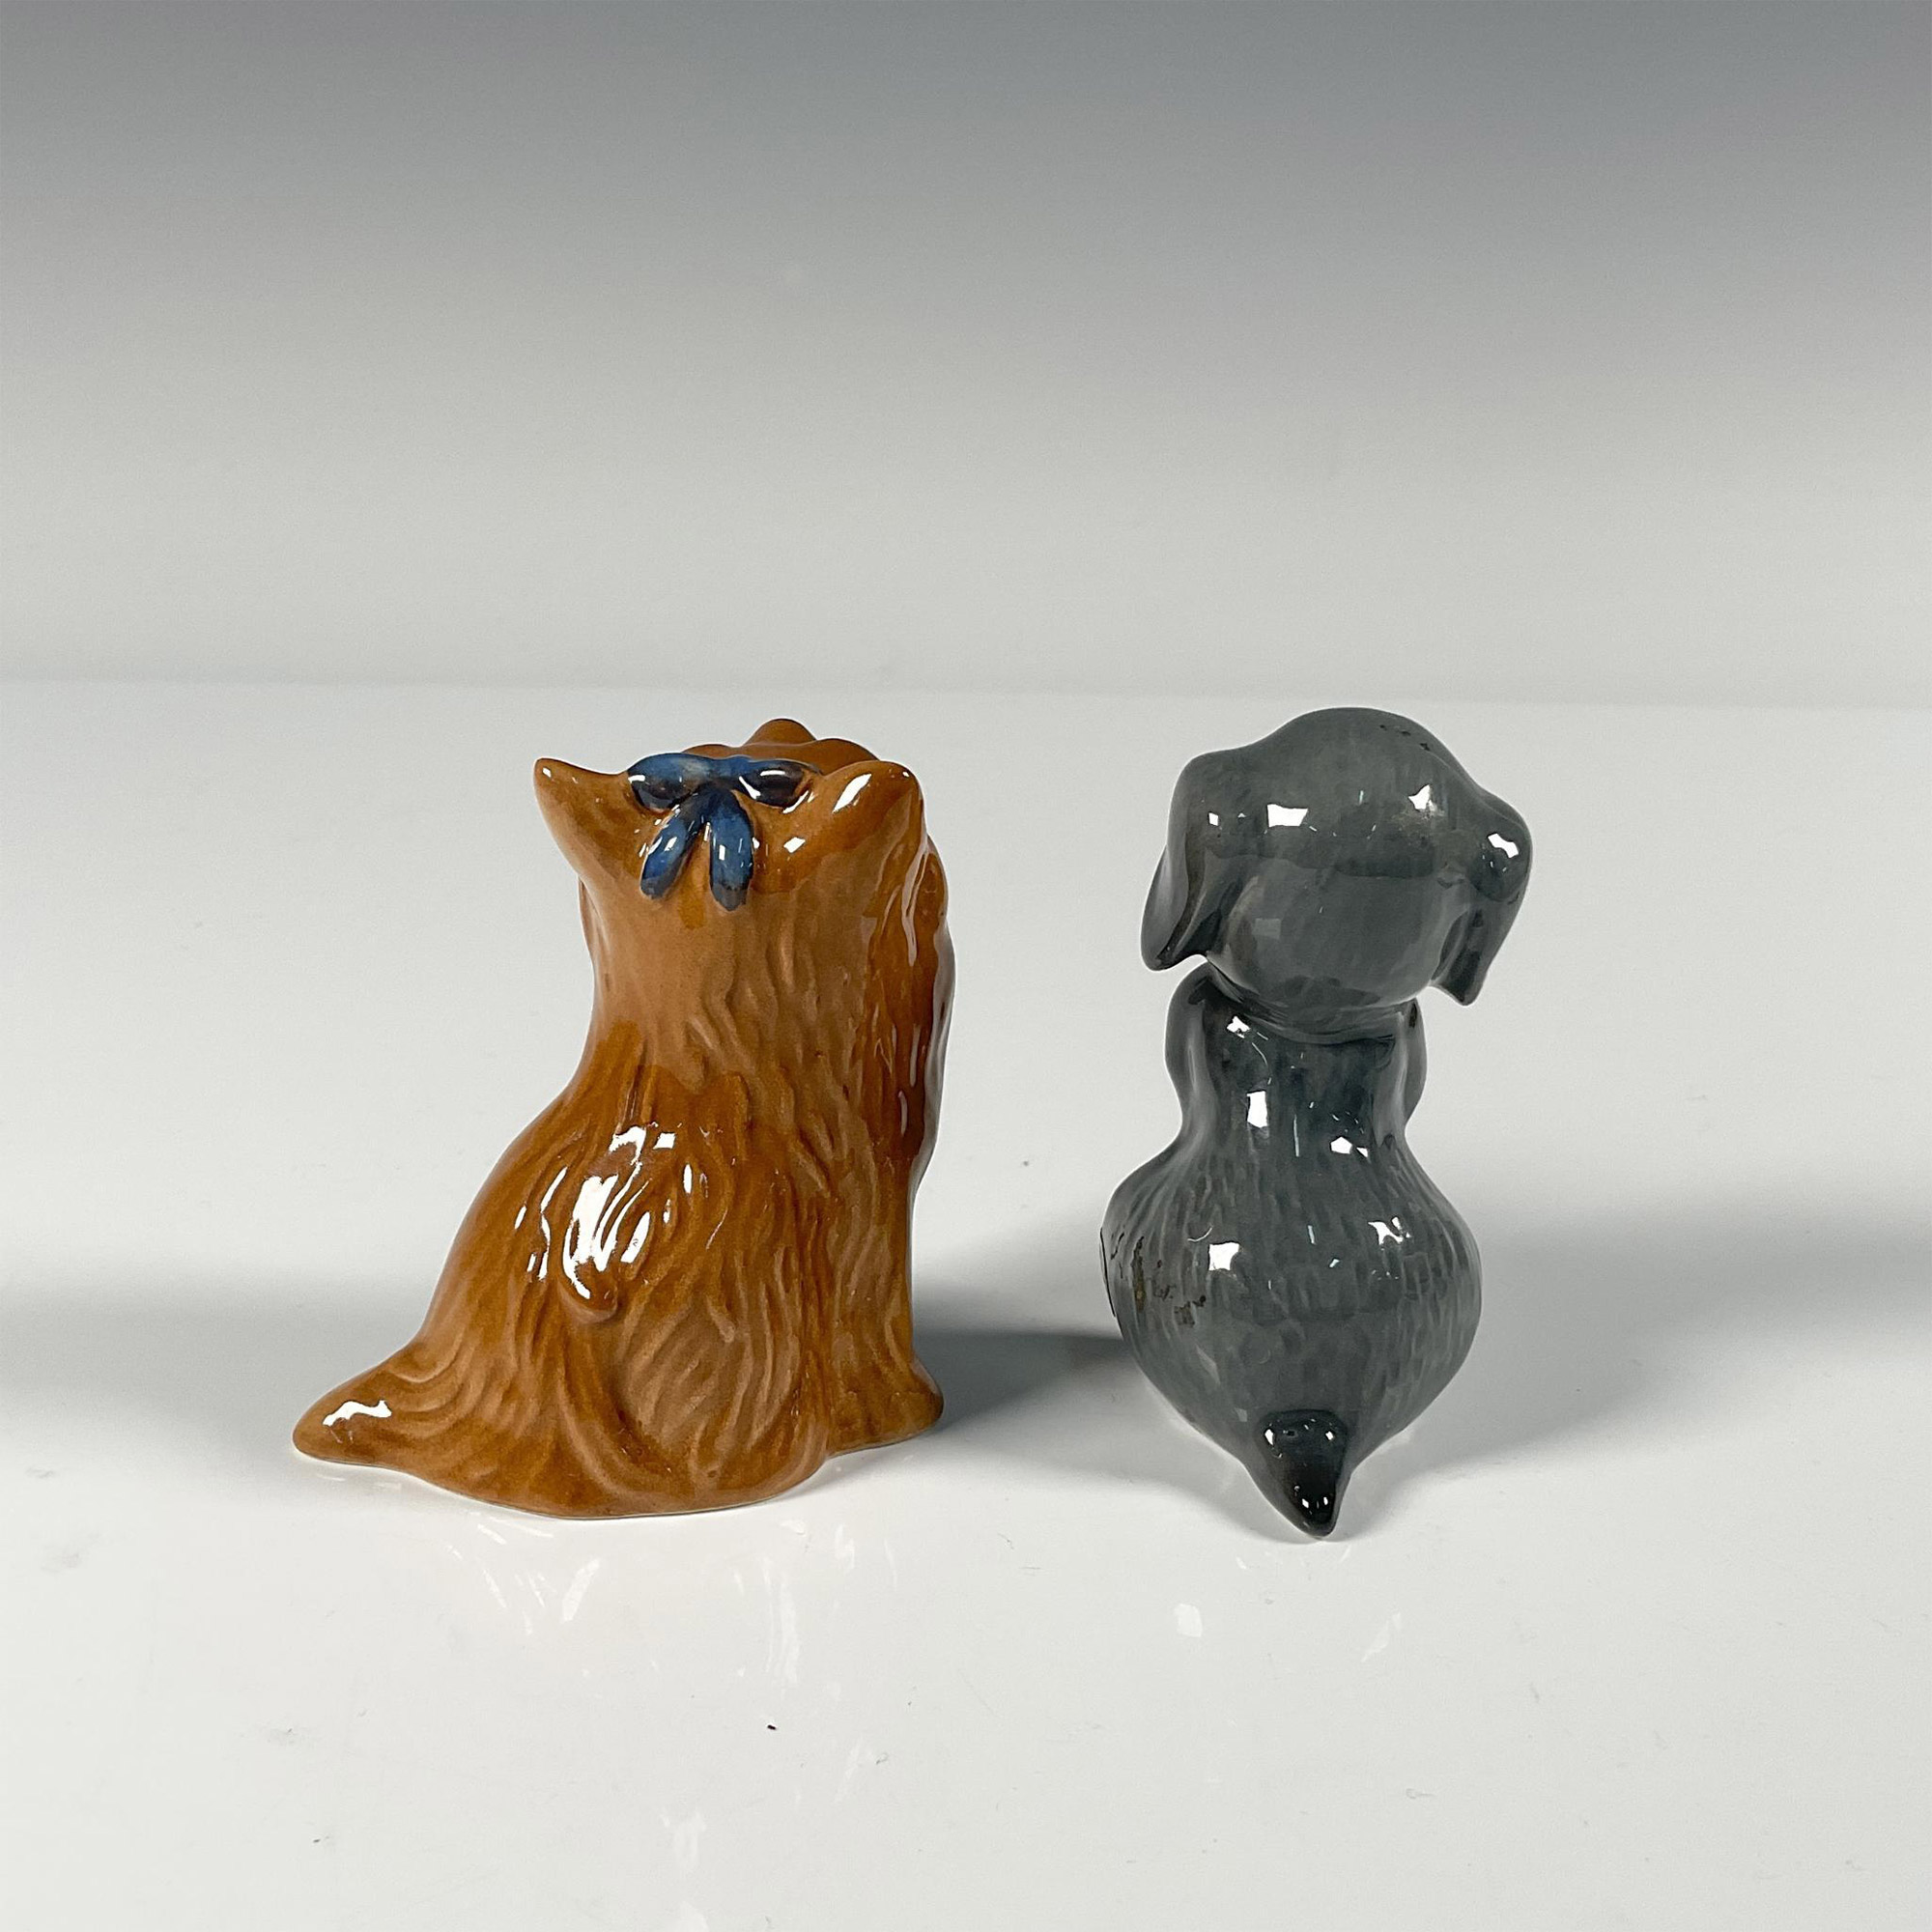 2pc Beswick Figurines, Yorkshire Terrier and Praying Dog - Image 2 of 3